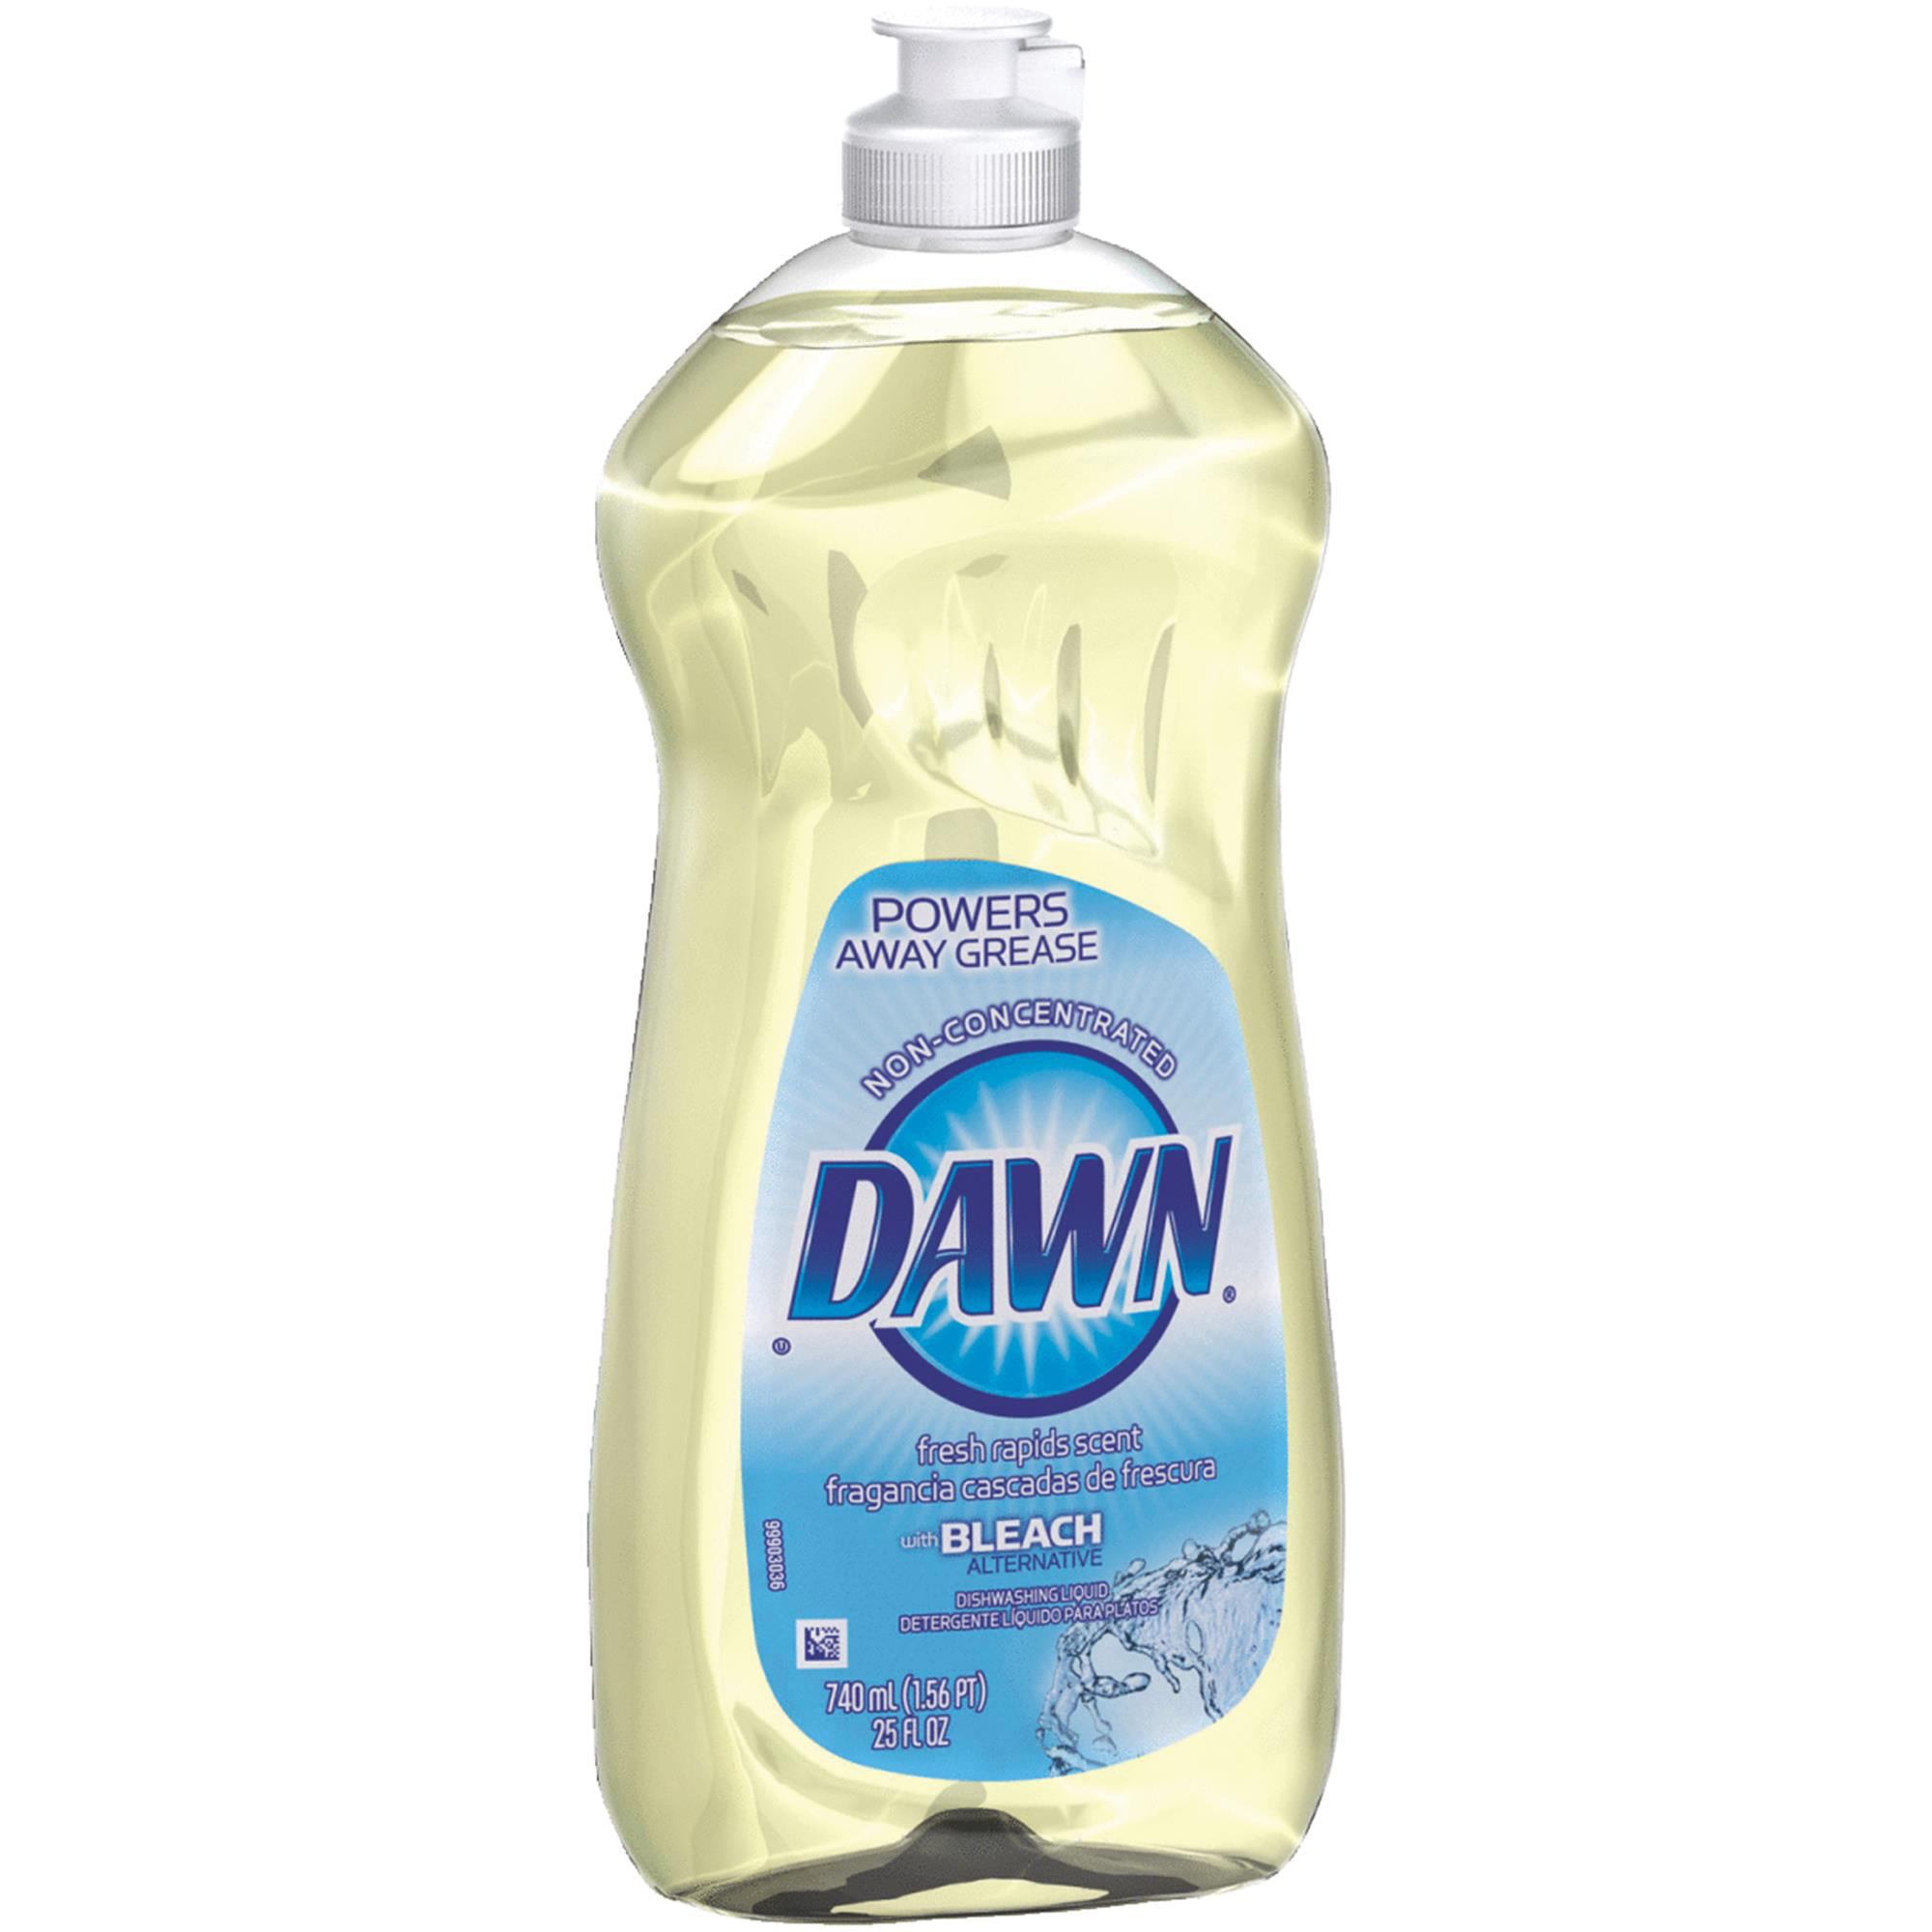 An Awesome Alternative Use for Dawn Soap - The Chirping Moms